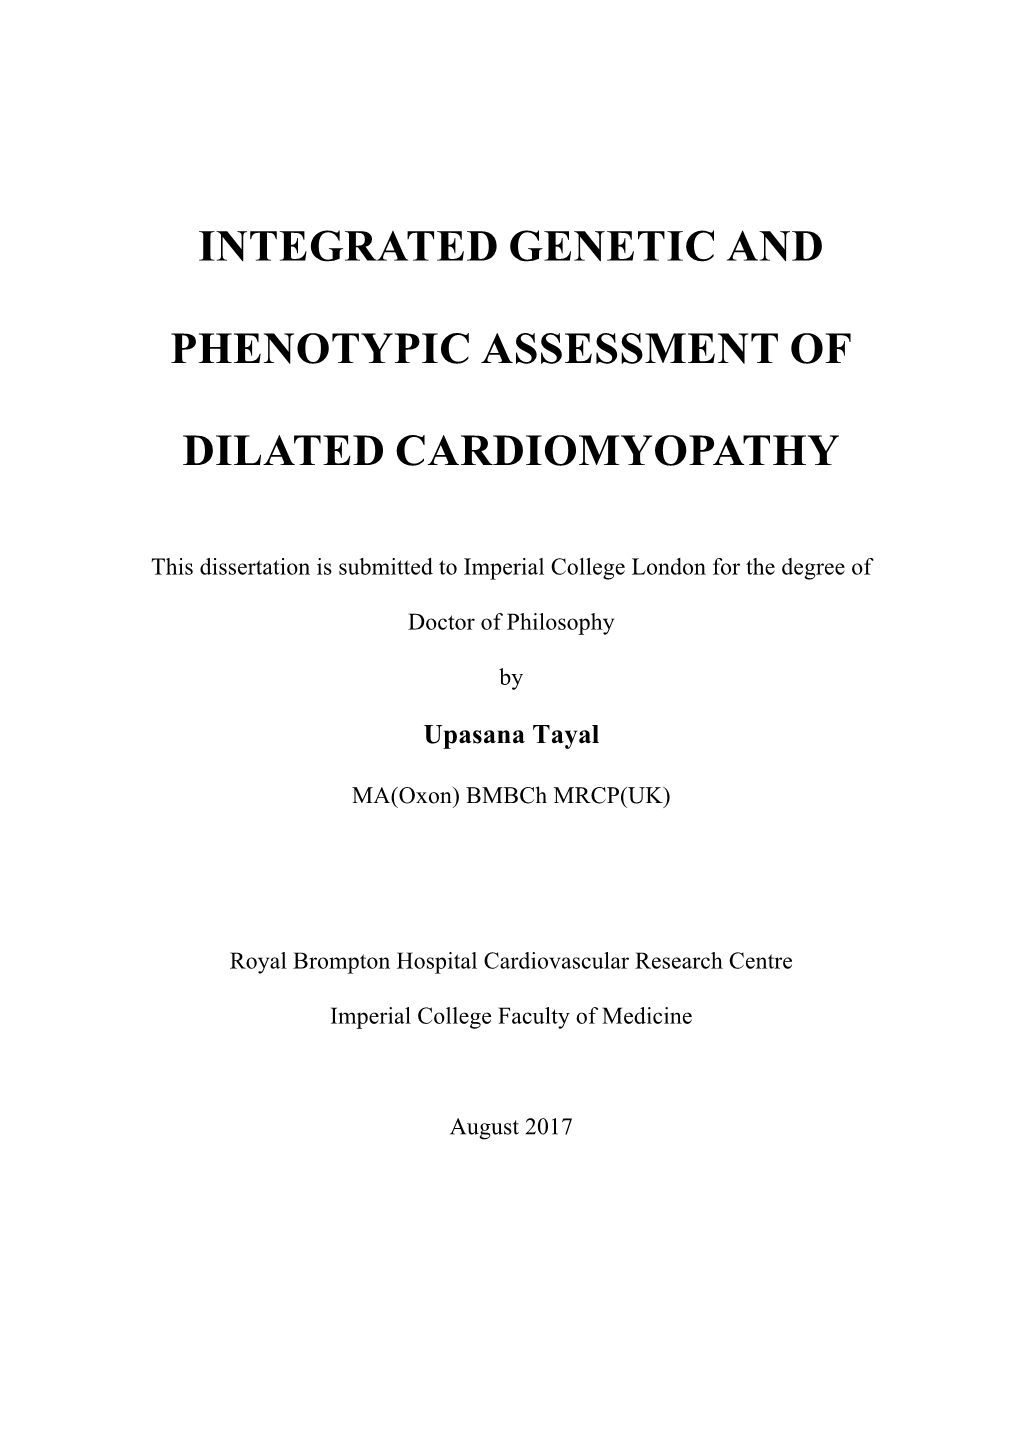 Integrated Genetic and Phenotypic Assessment of Dilated